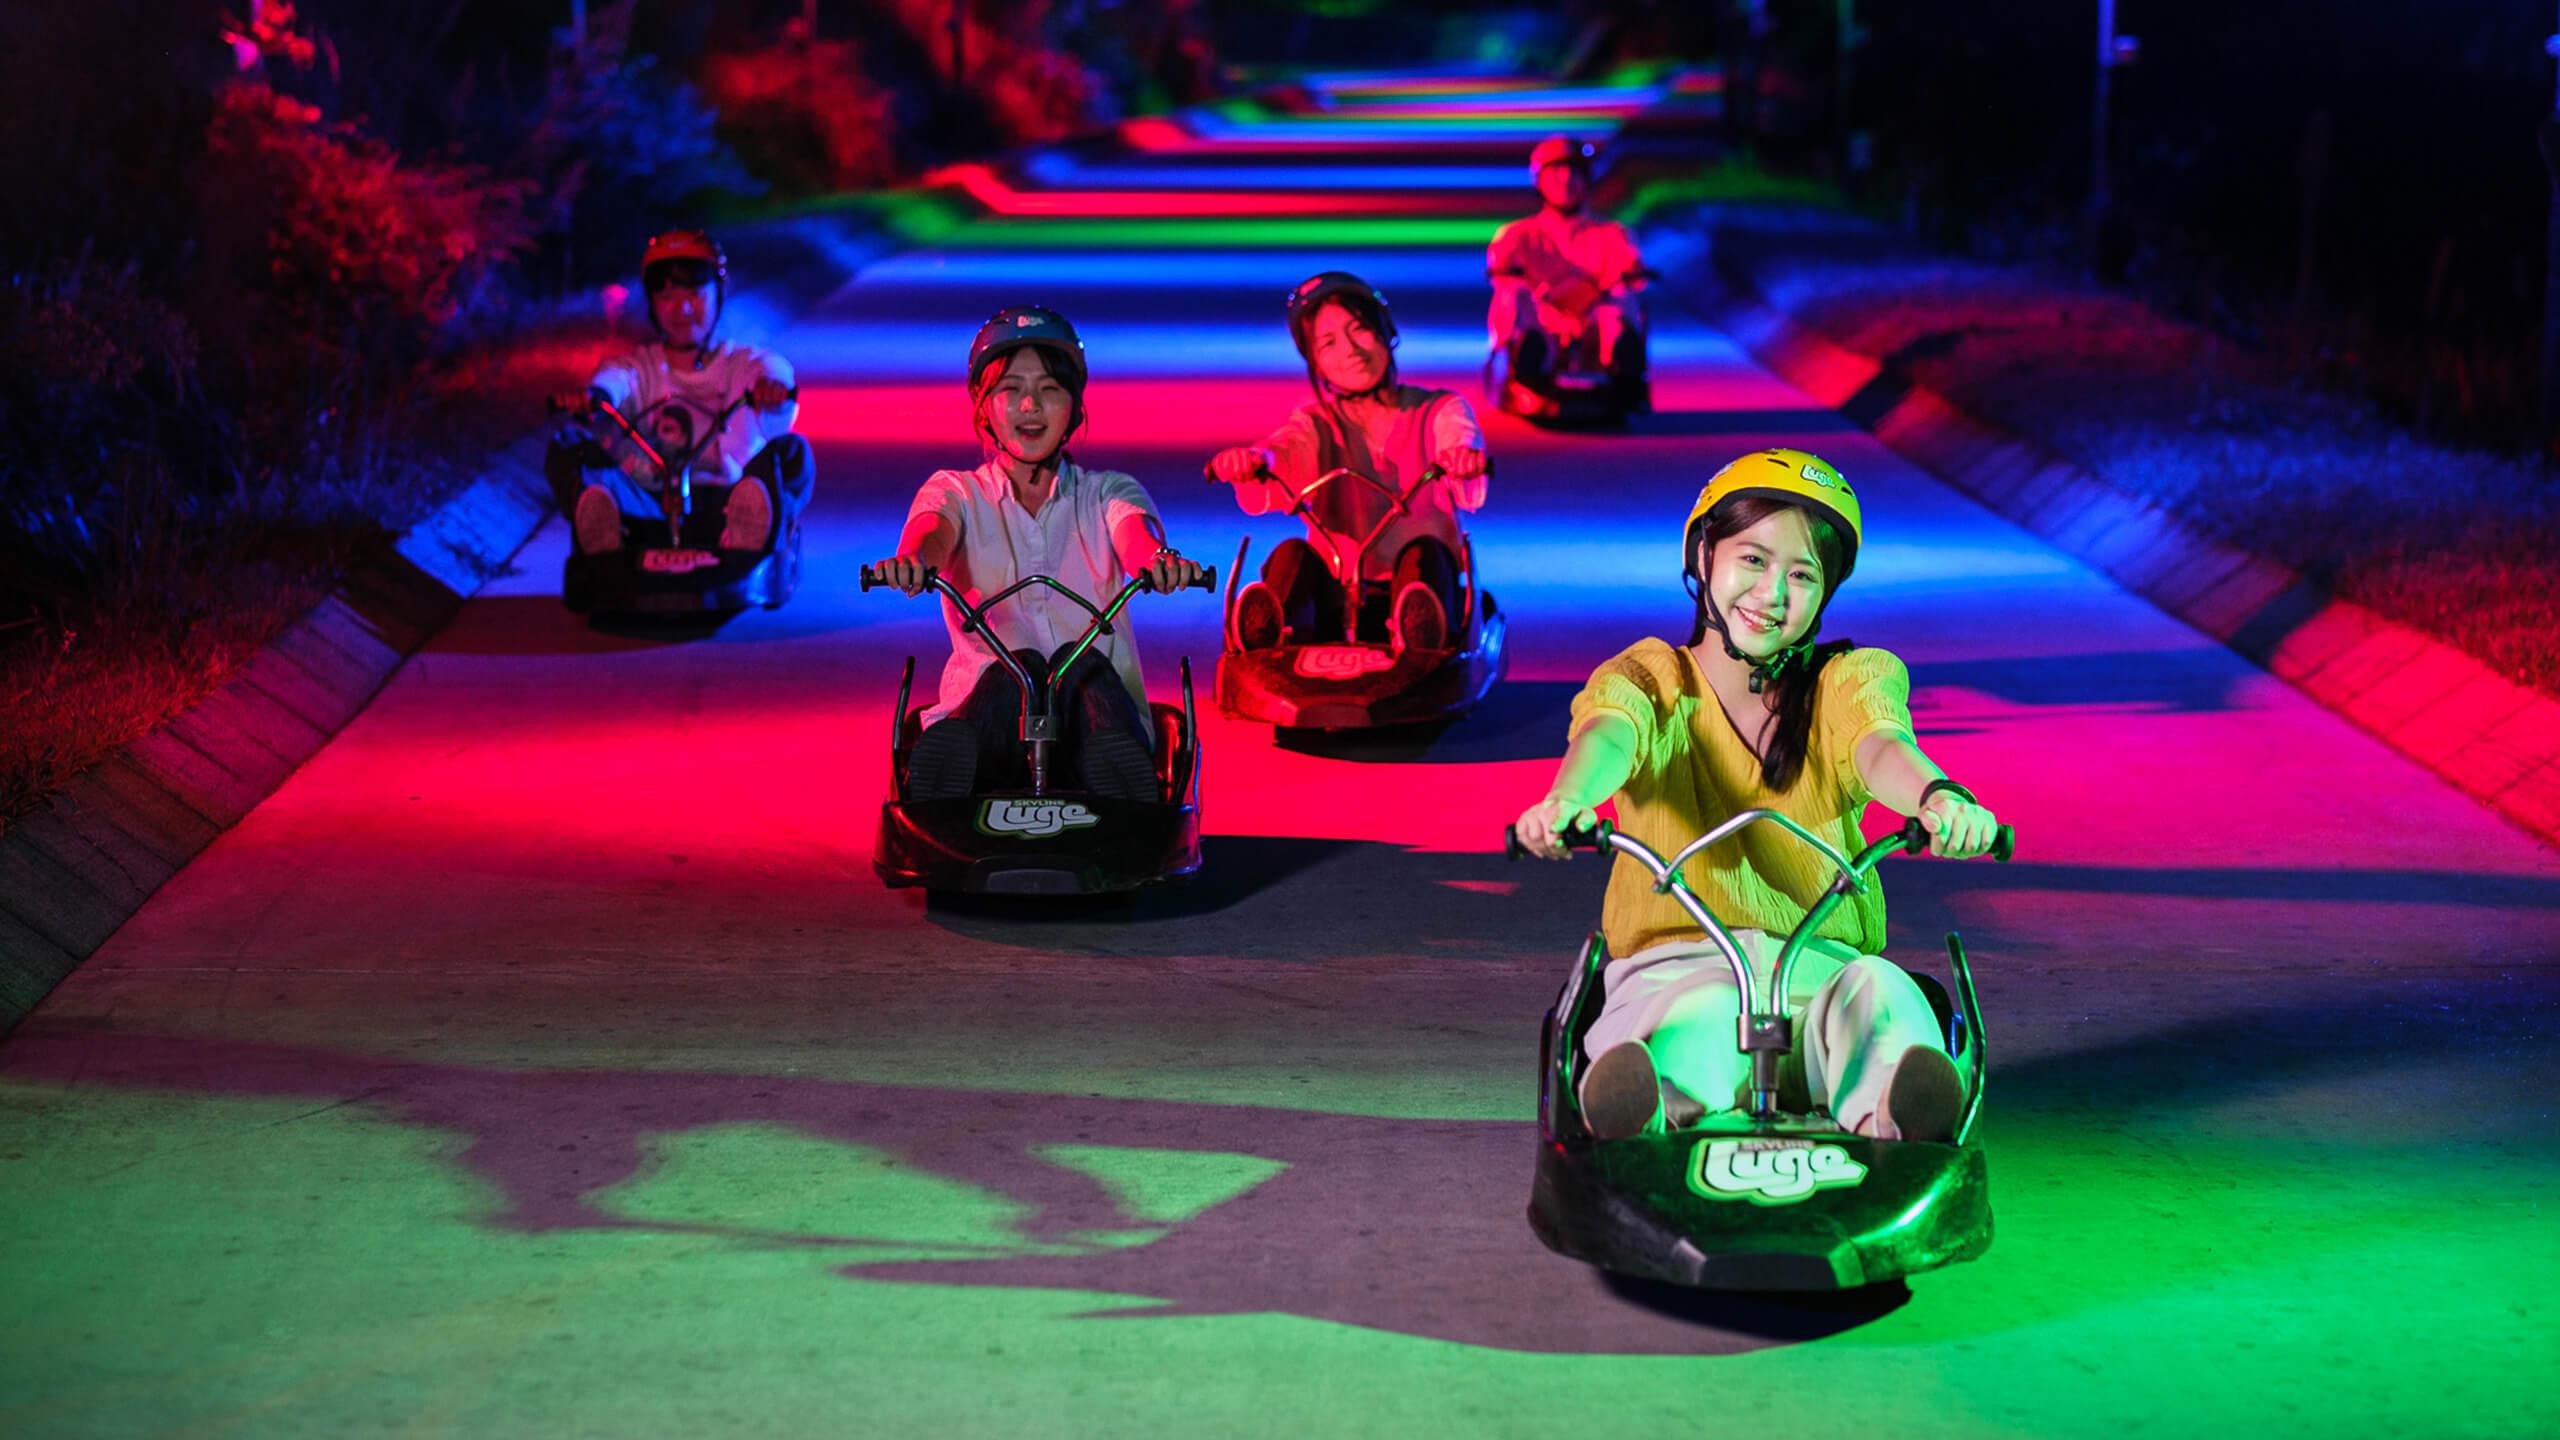 A group of people head down the tracks on the Night Luge at Skyline Luge Tongyeong.